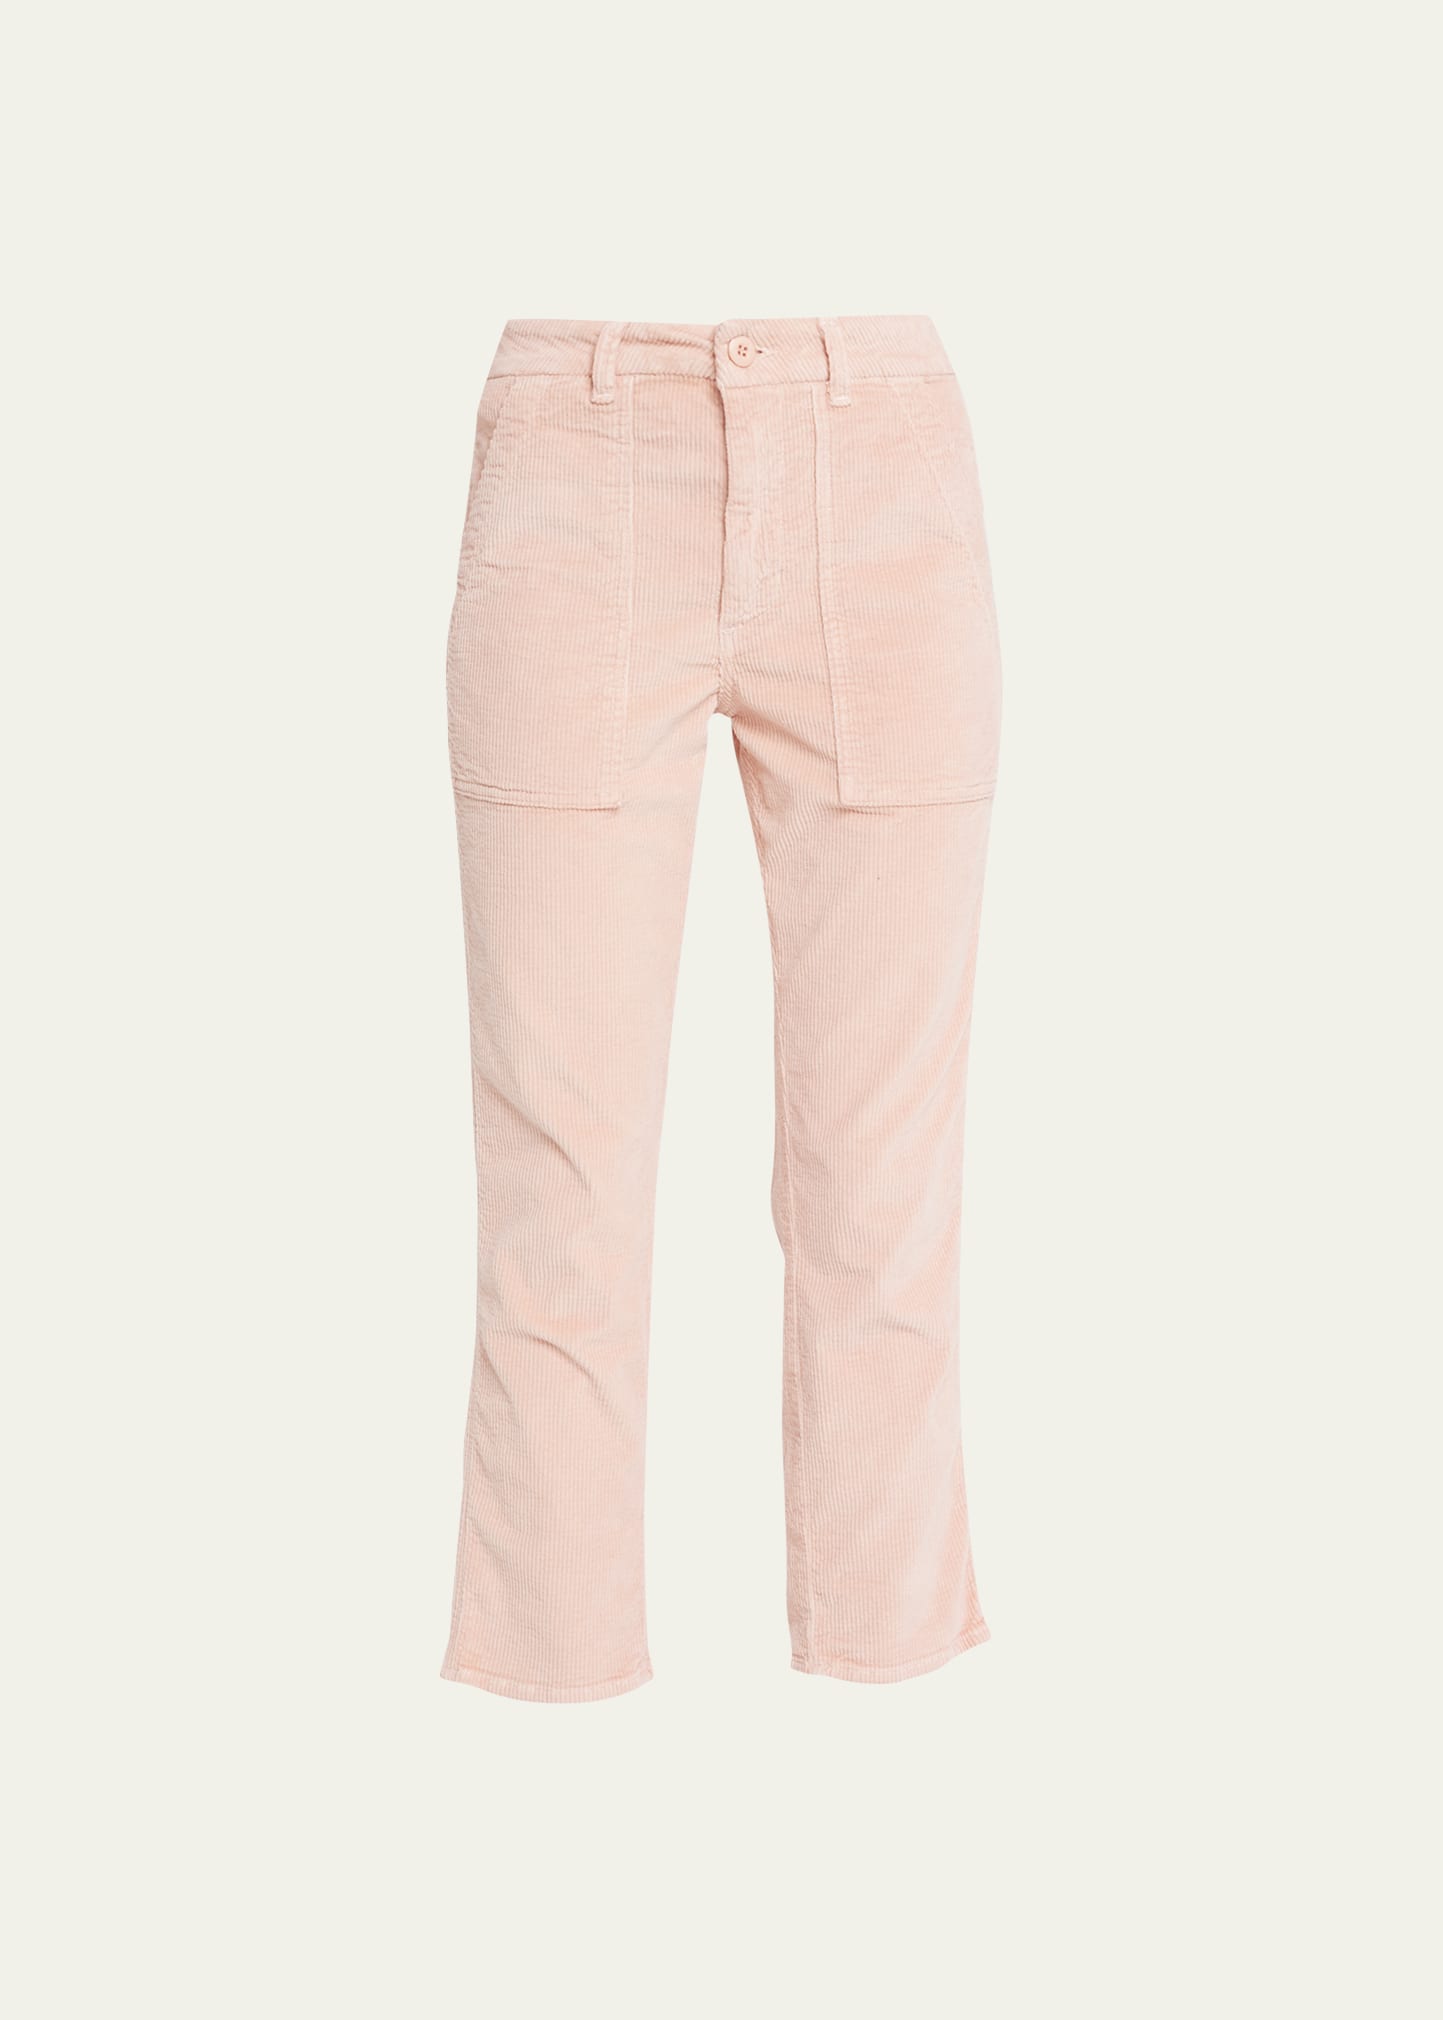 Amo Denim Corduroy Army Trousers In Pink Clay